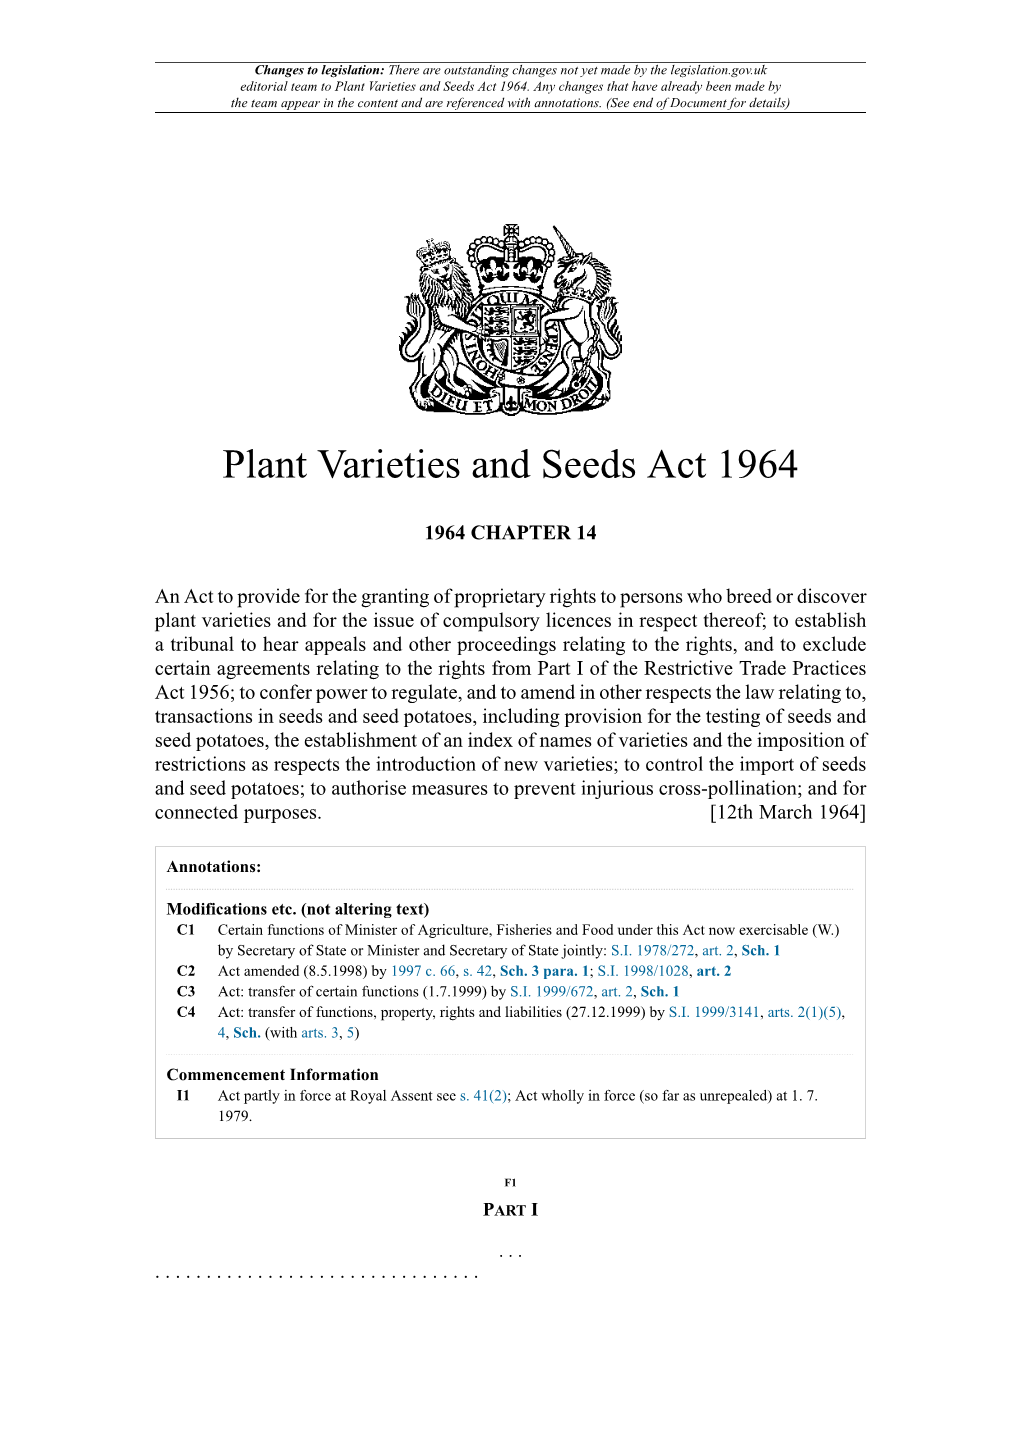 Plant Varieties and Seeds Act 1964